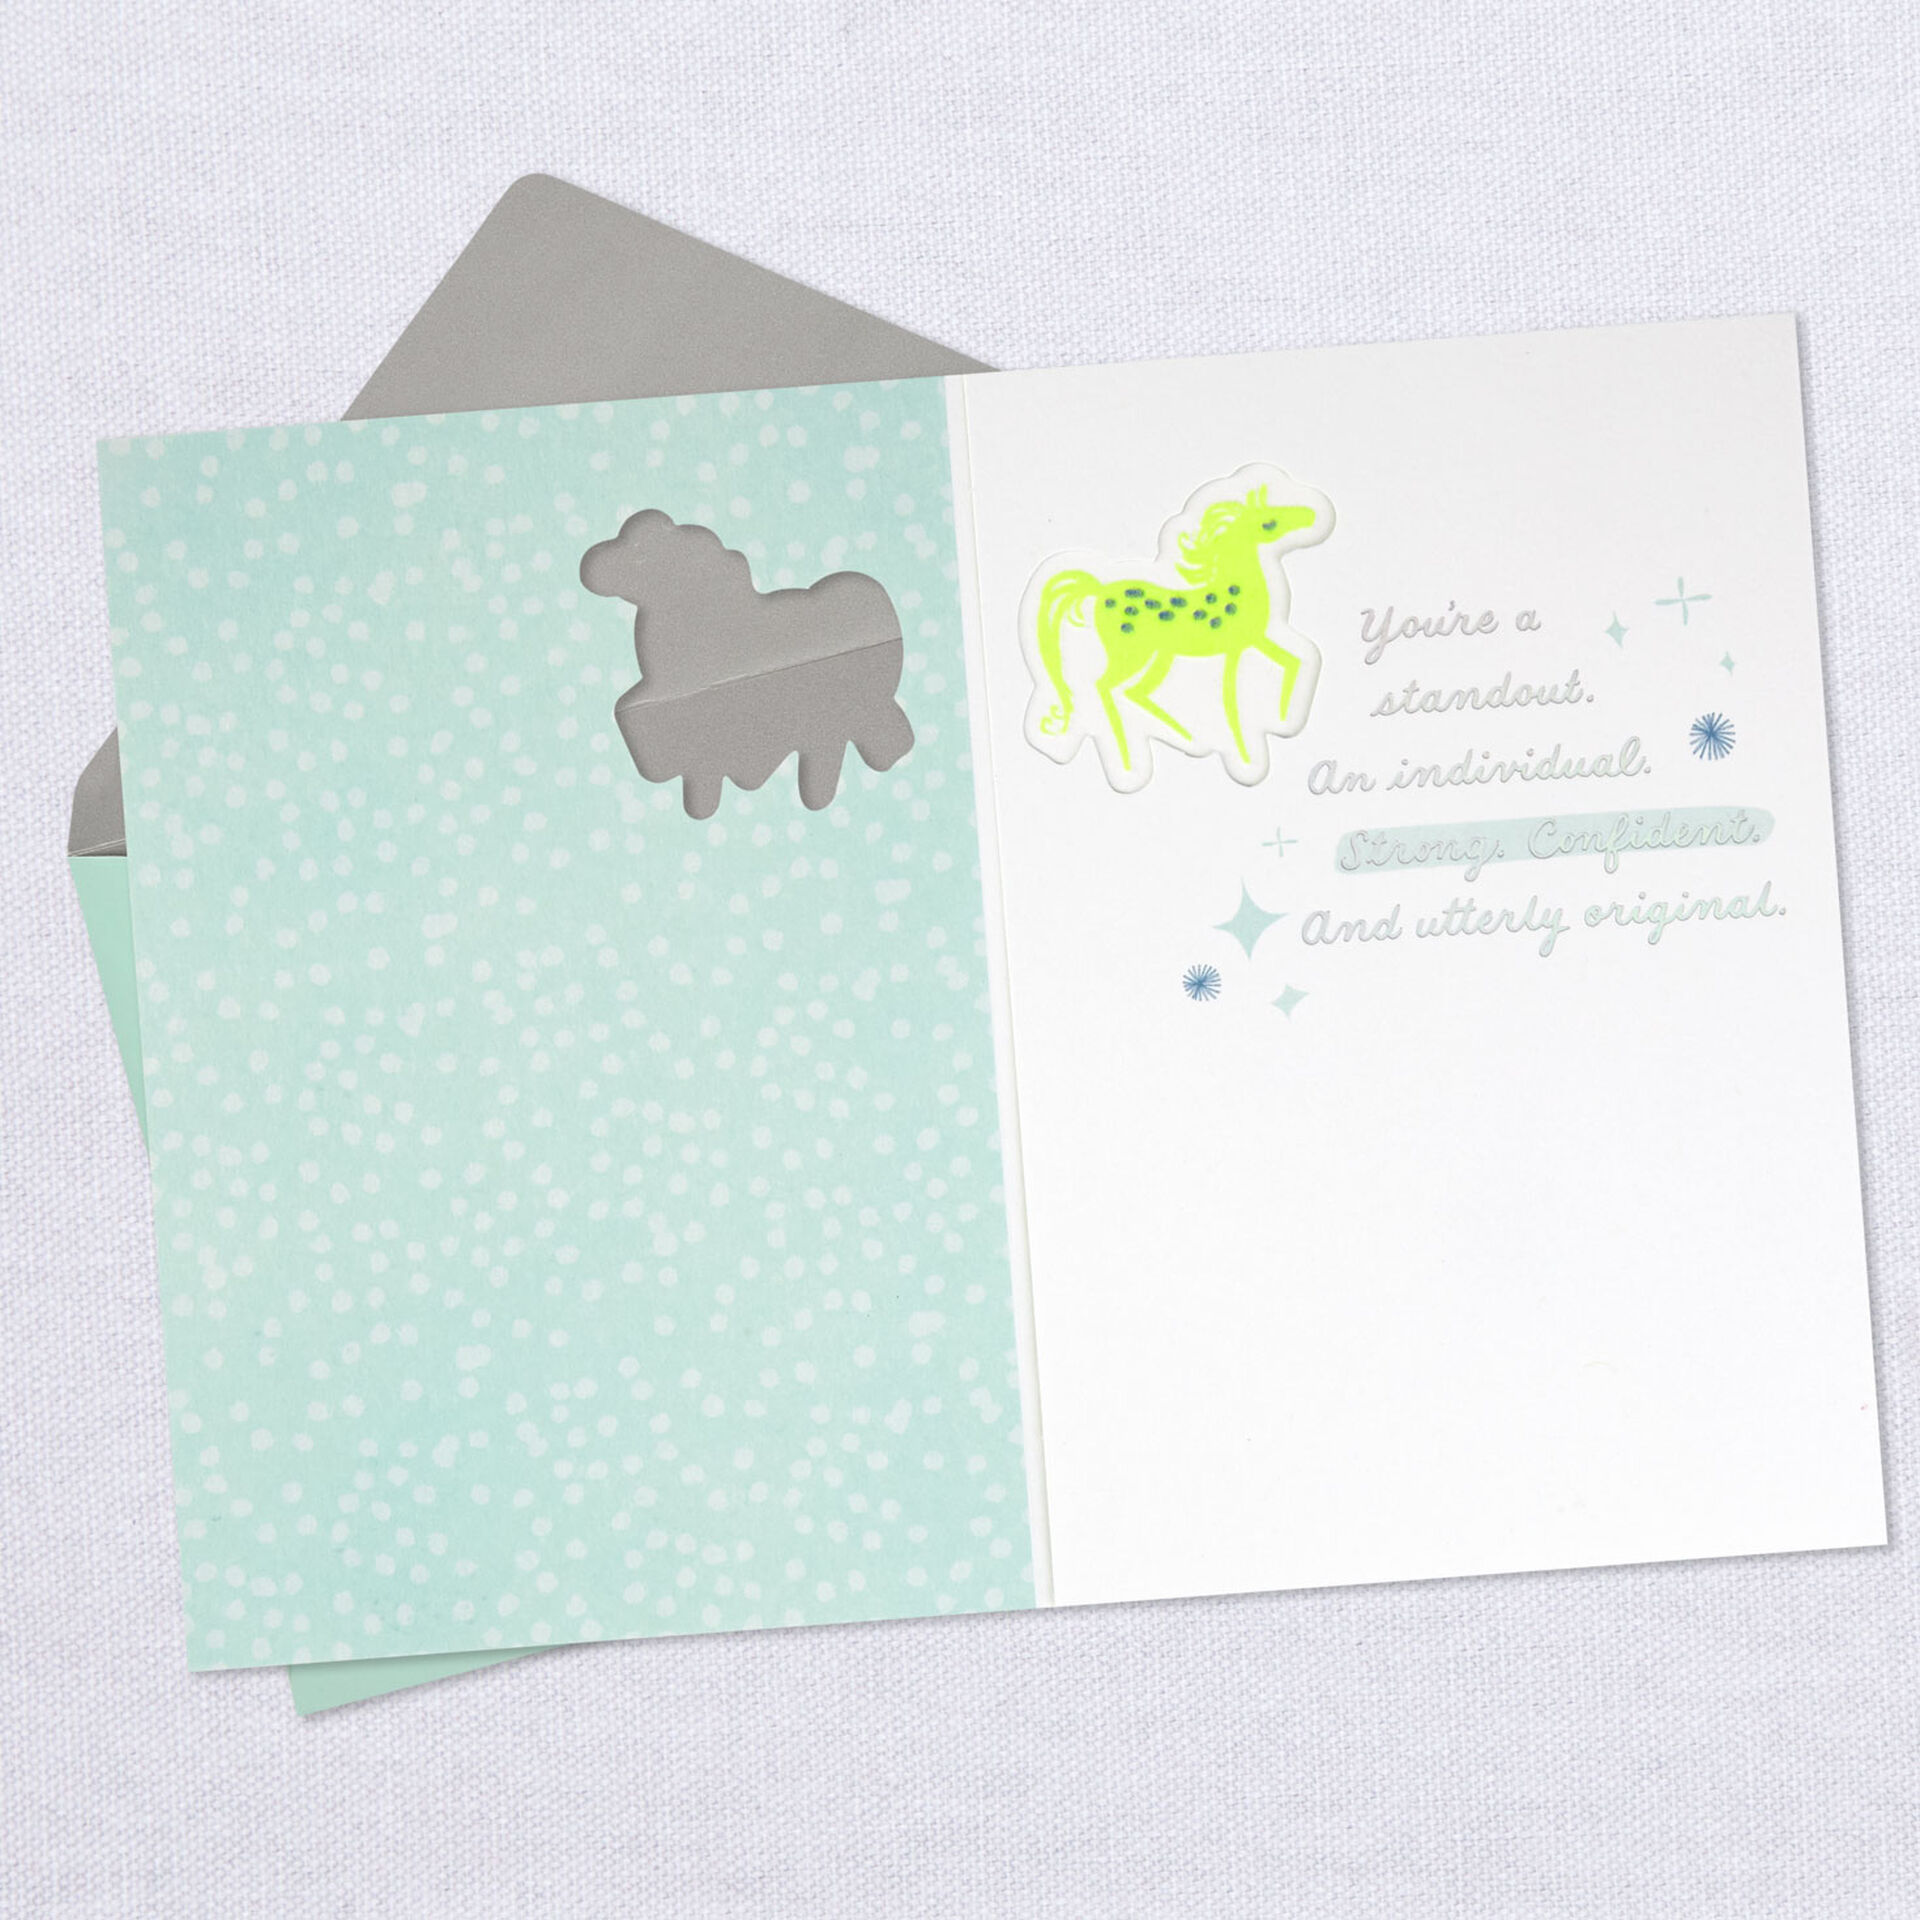 Youre-a-Standout-Horses-Birthday-Card-for-Daughter_499FBD4285_03